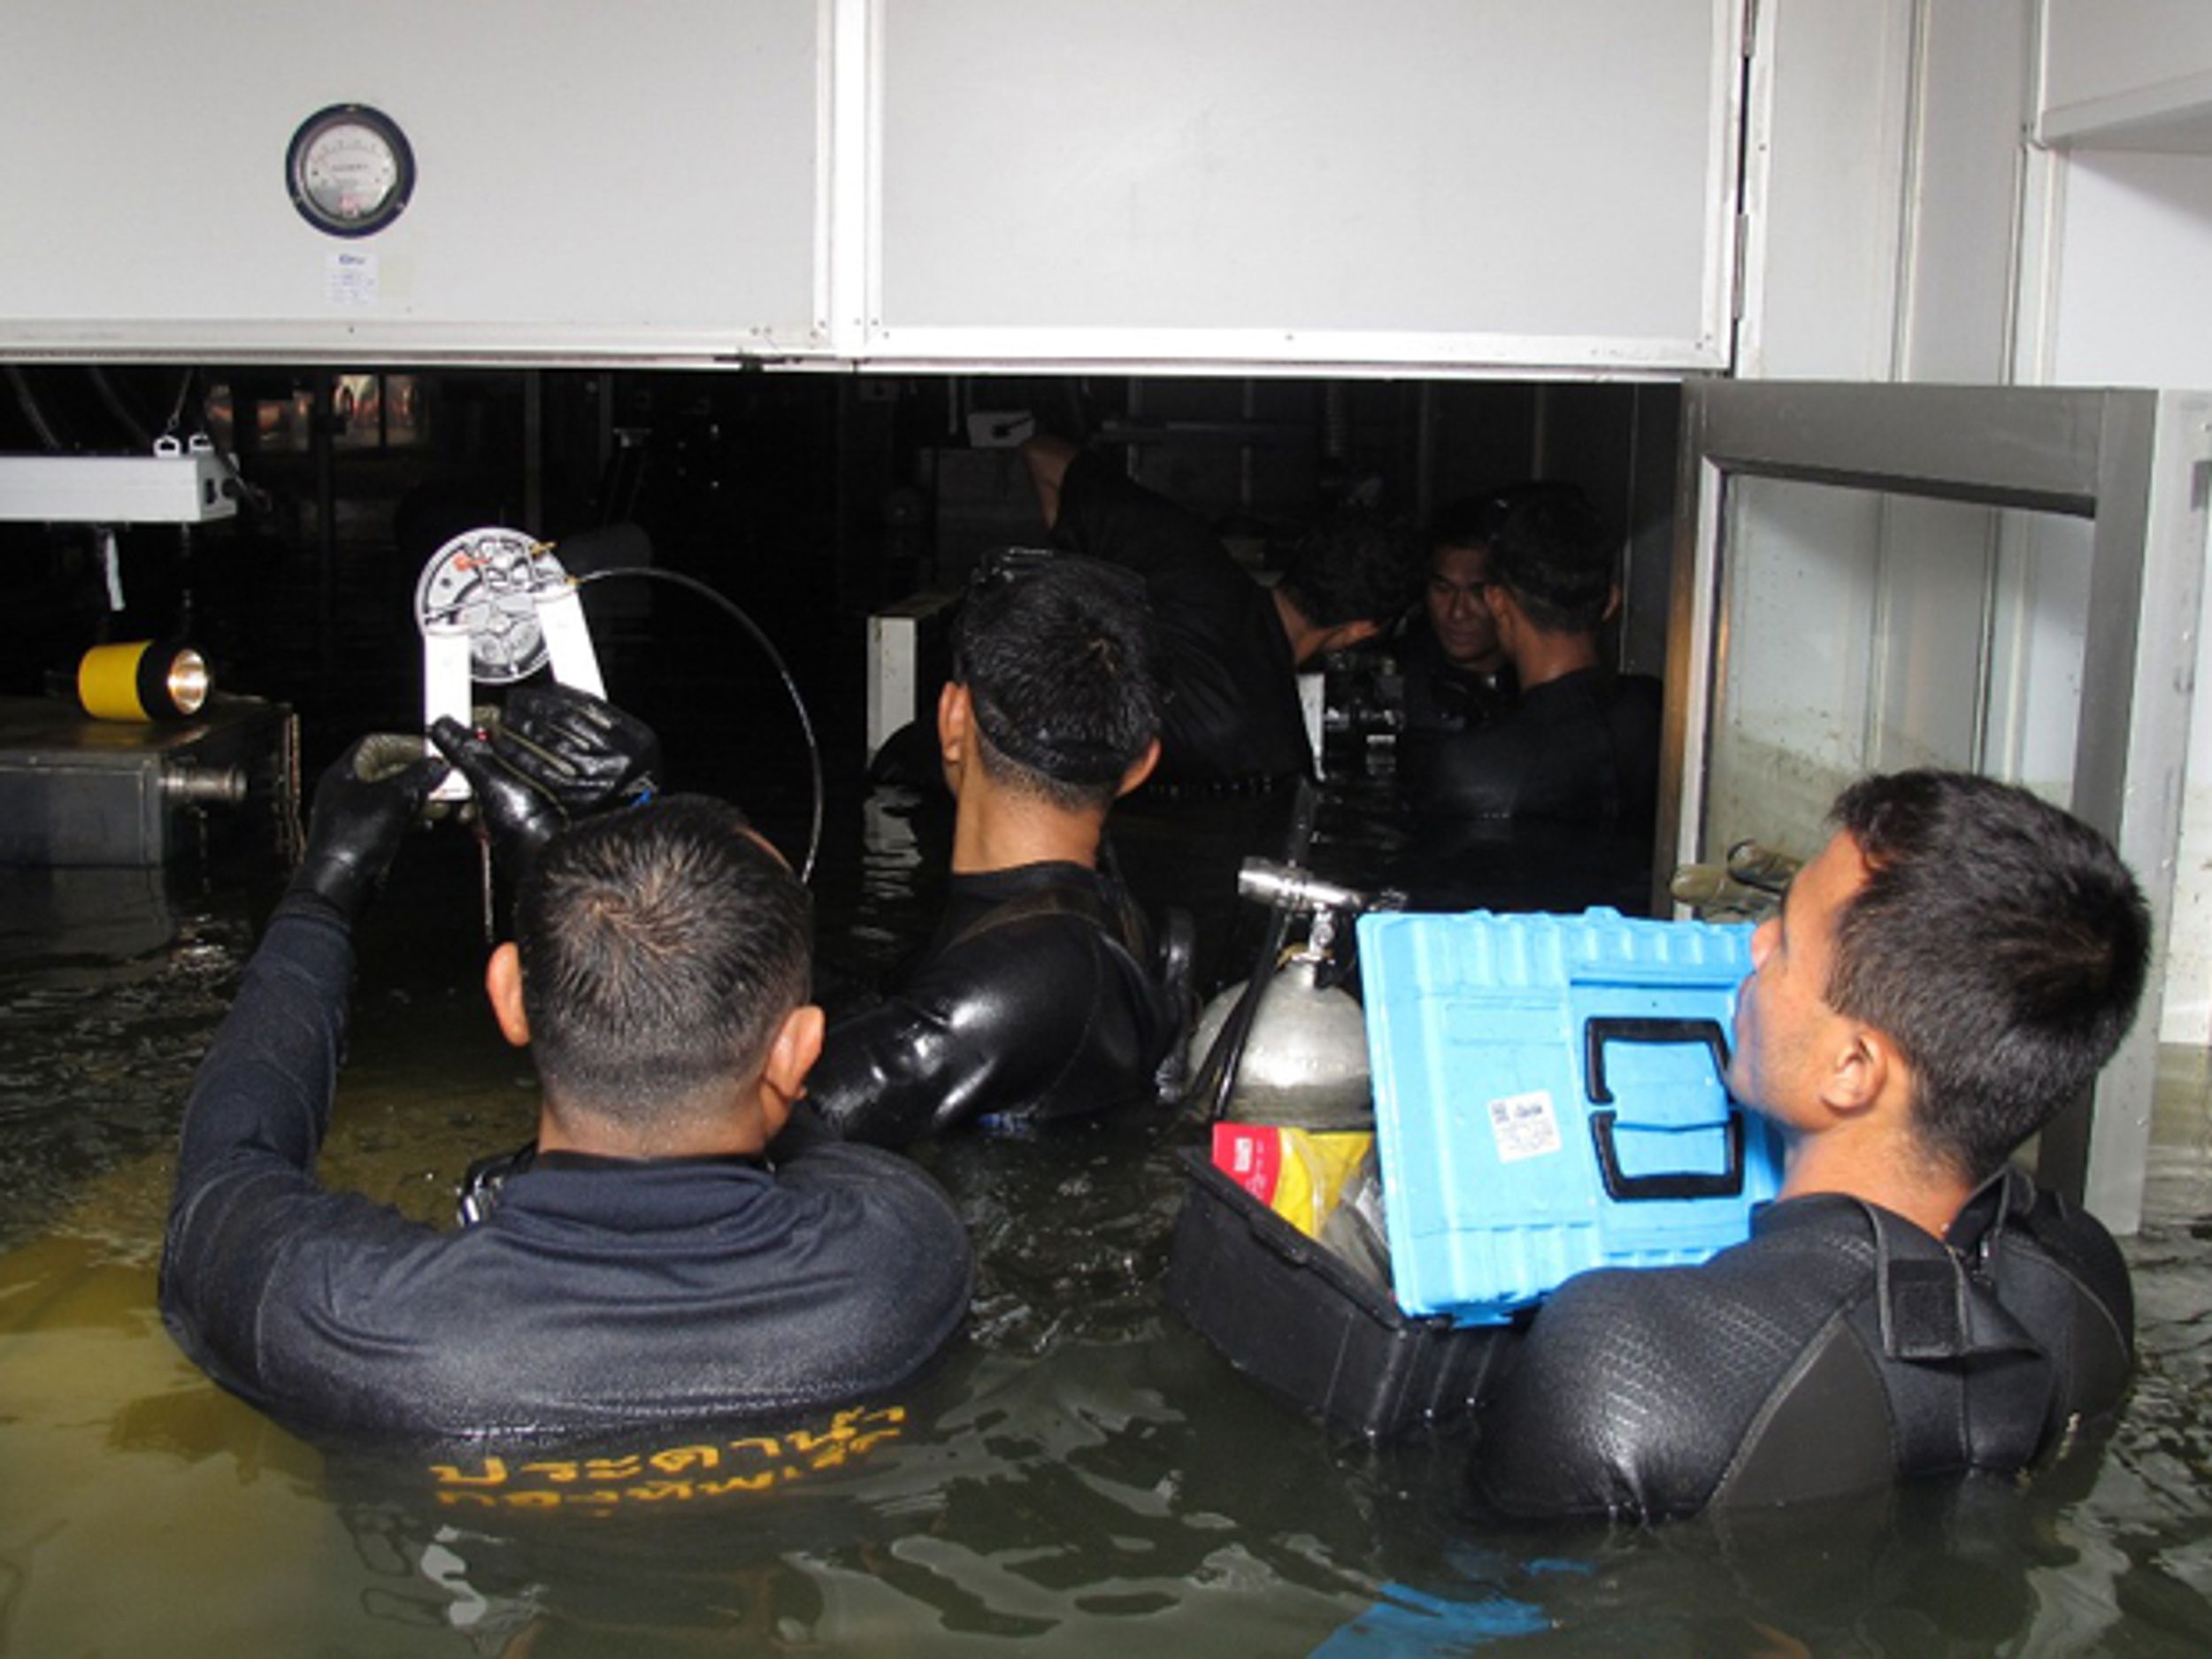 Thai Navy divers were called in to salvage disk drive manufacturing tools. Their efforts contributed to a quick recovery.